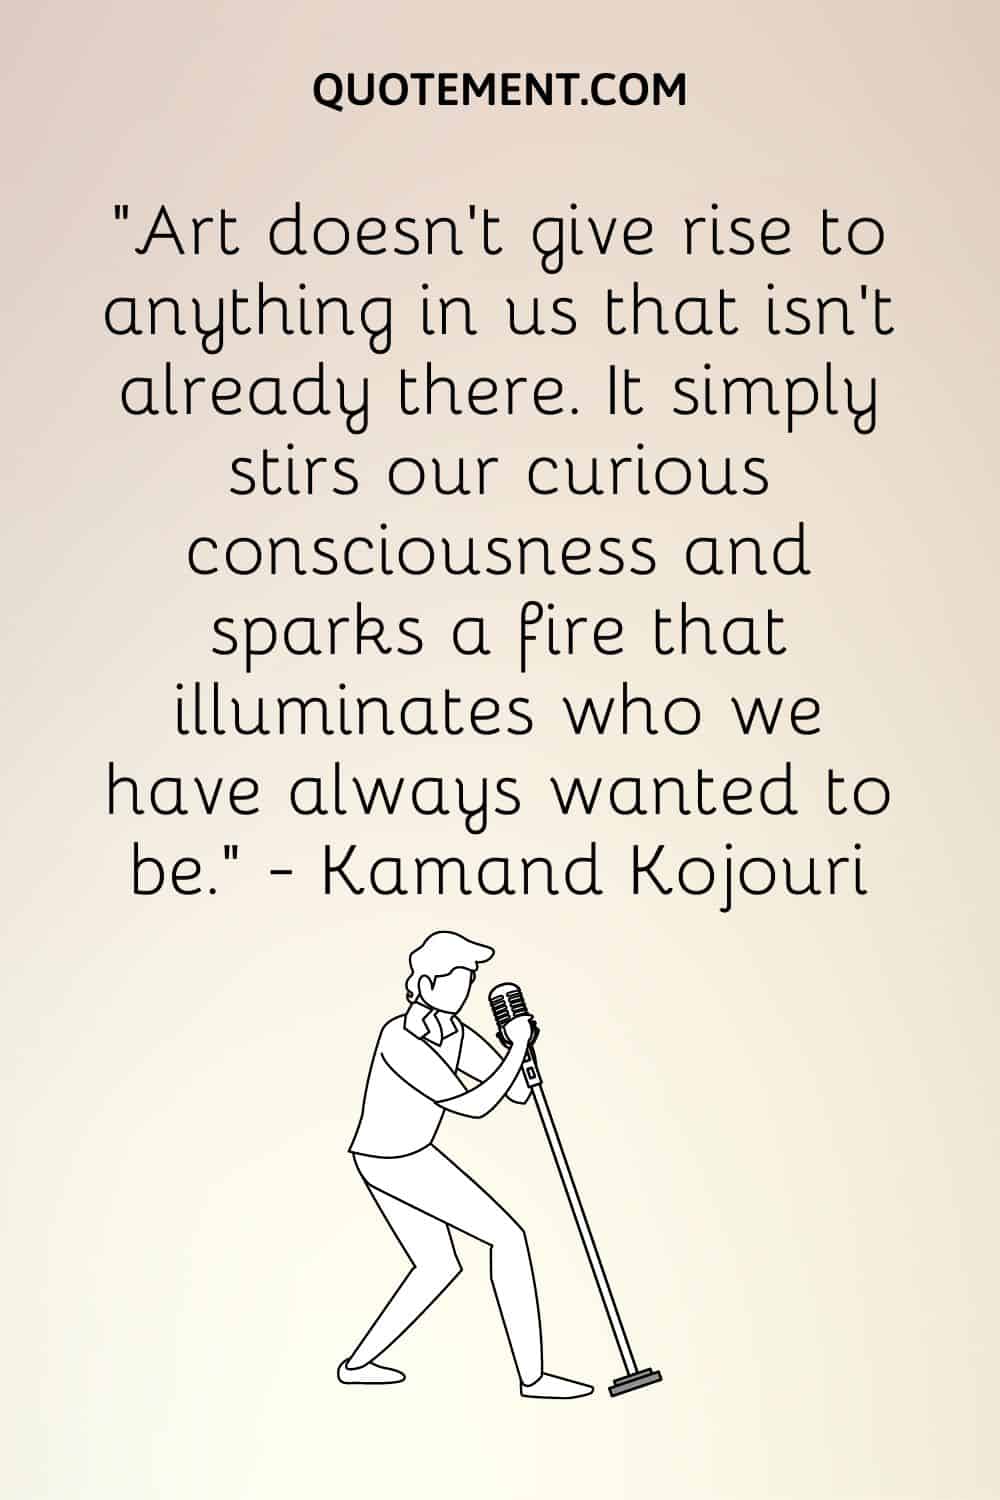 “Art doesn’t give rise to anything in us that isn’t already there. It simply stirs our curious consciousness and sparks a fire that illuminates who we have always wanted to be.” ― Kamand Kojouri